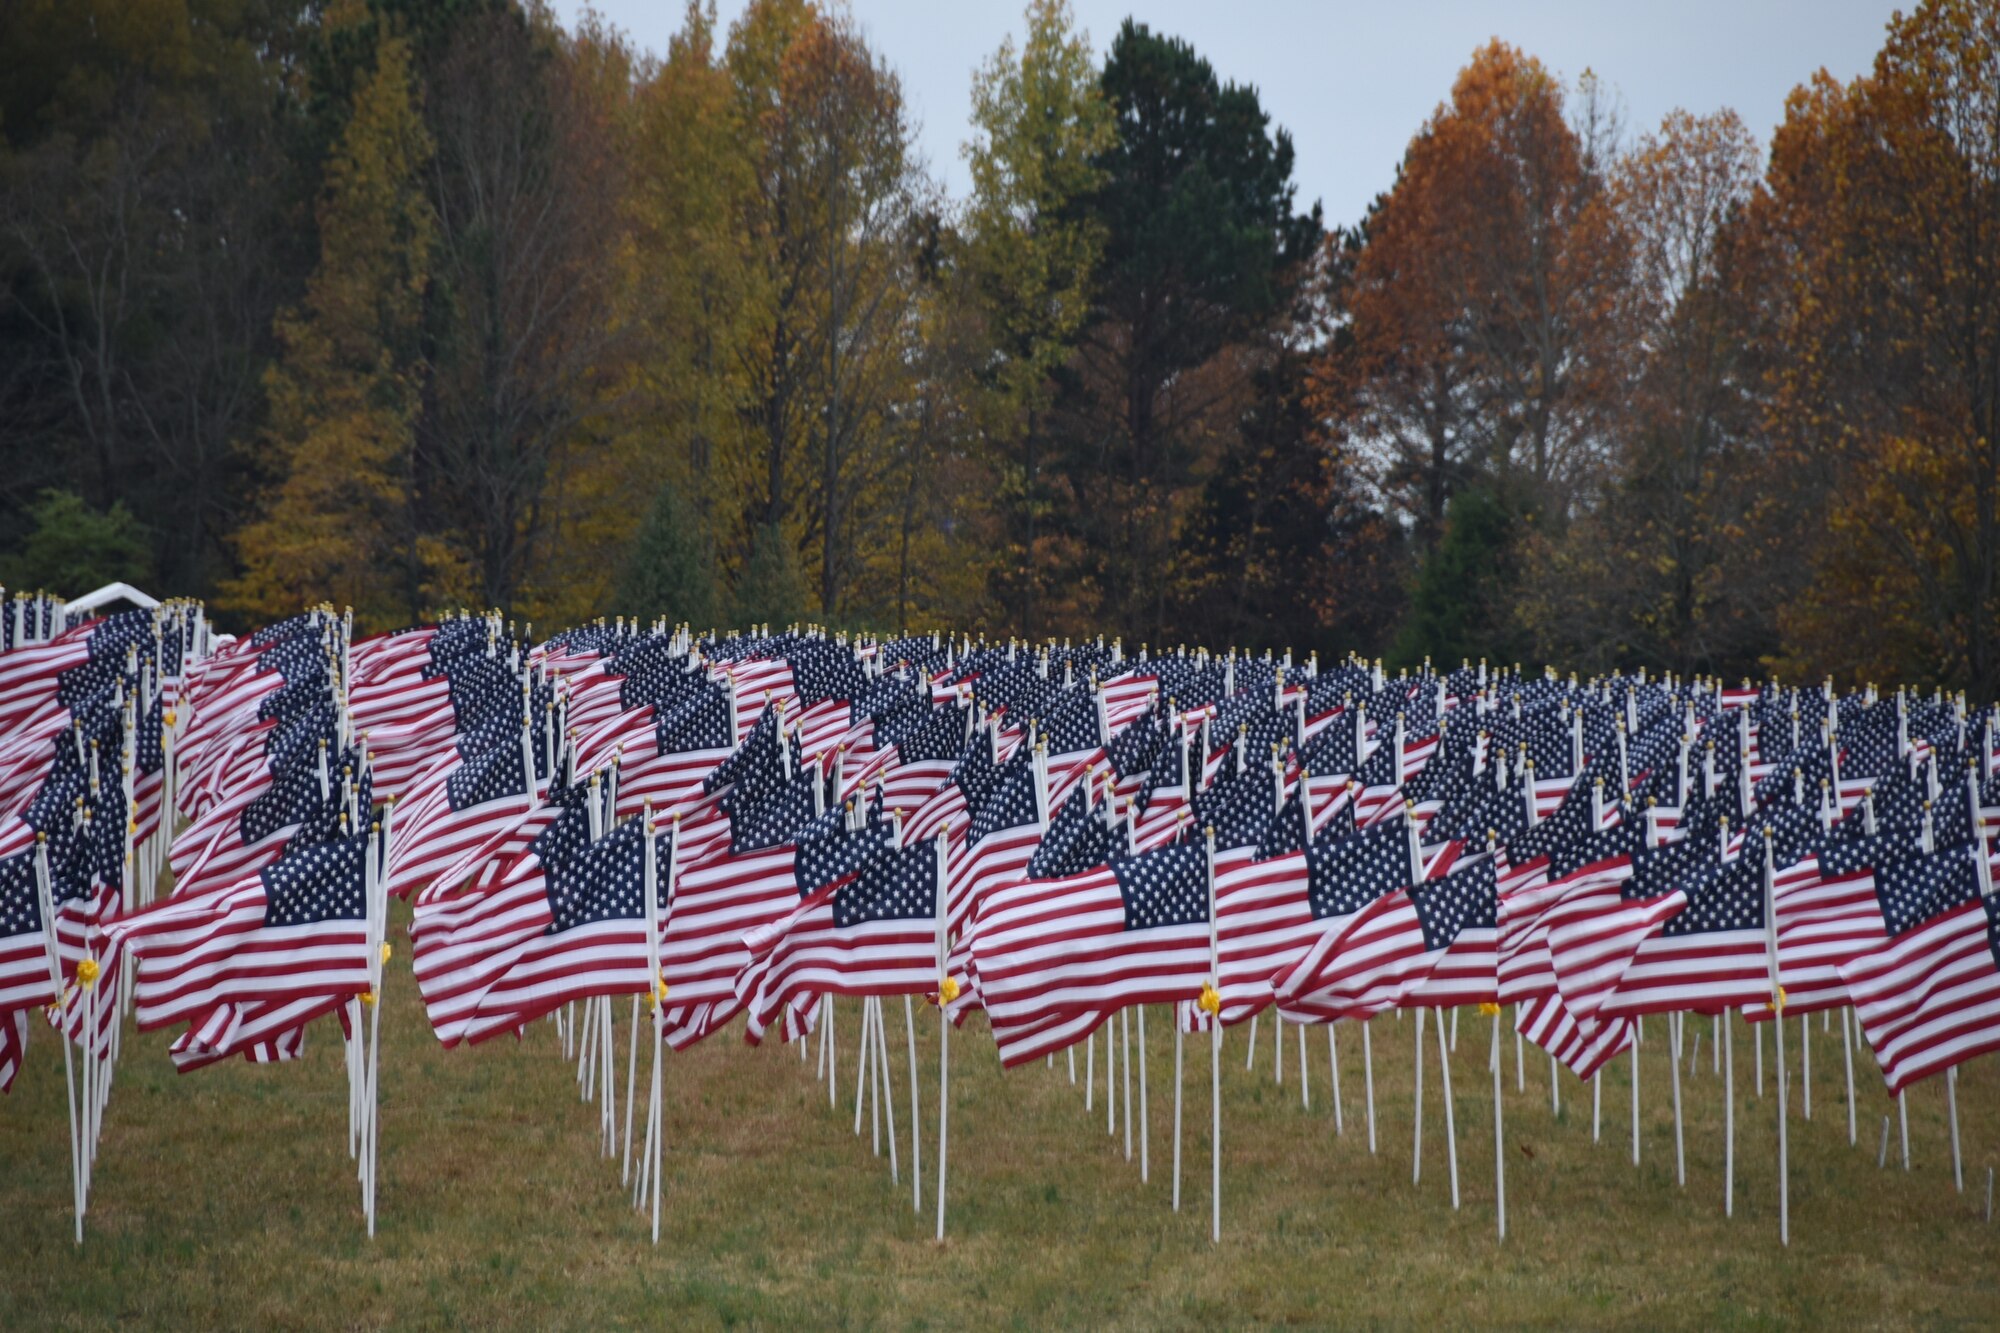 Over 1000 flags wave in the wind for a Veterans Day weekend event on Nov. 9, 2018 in Hermitage, Tennessee.